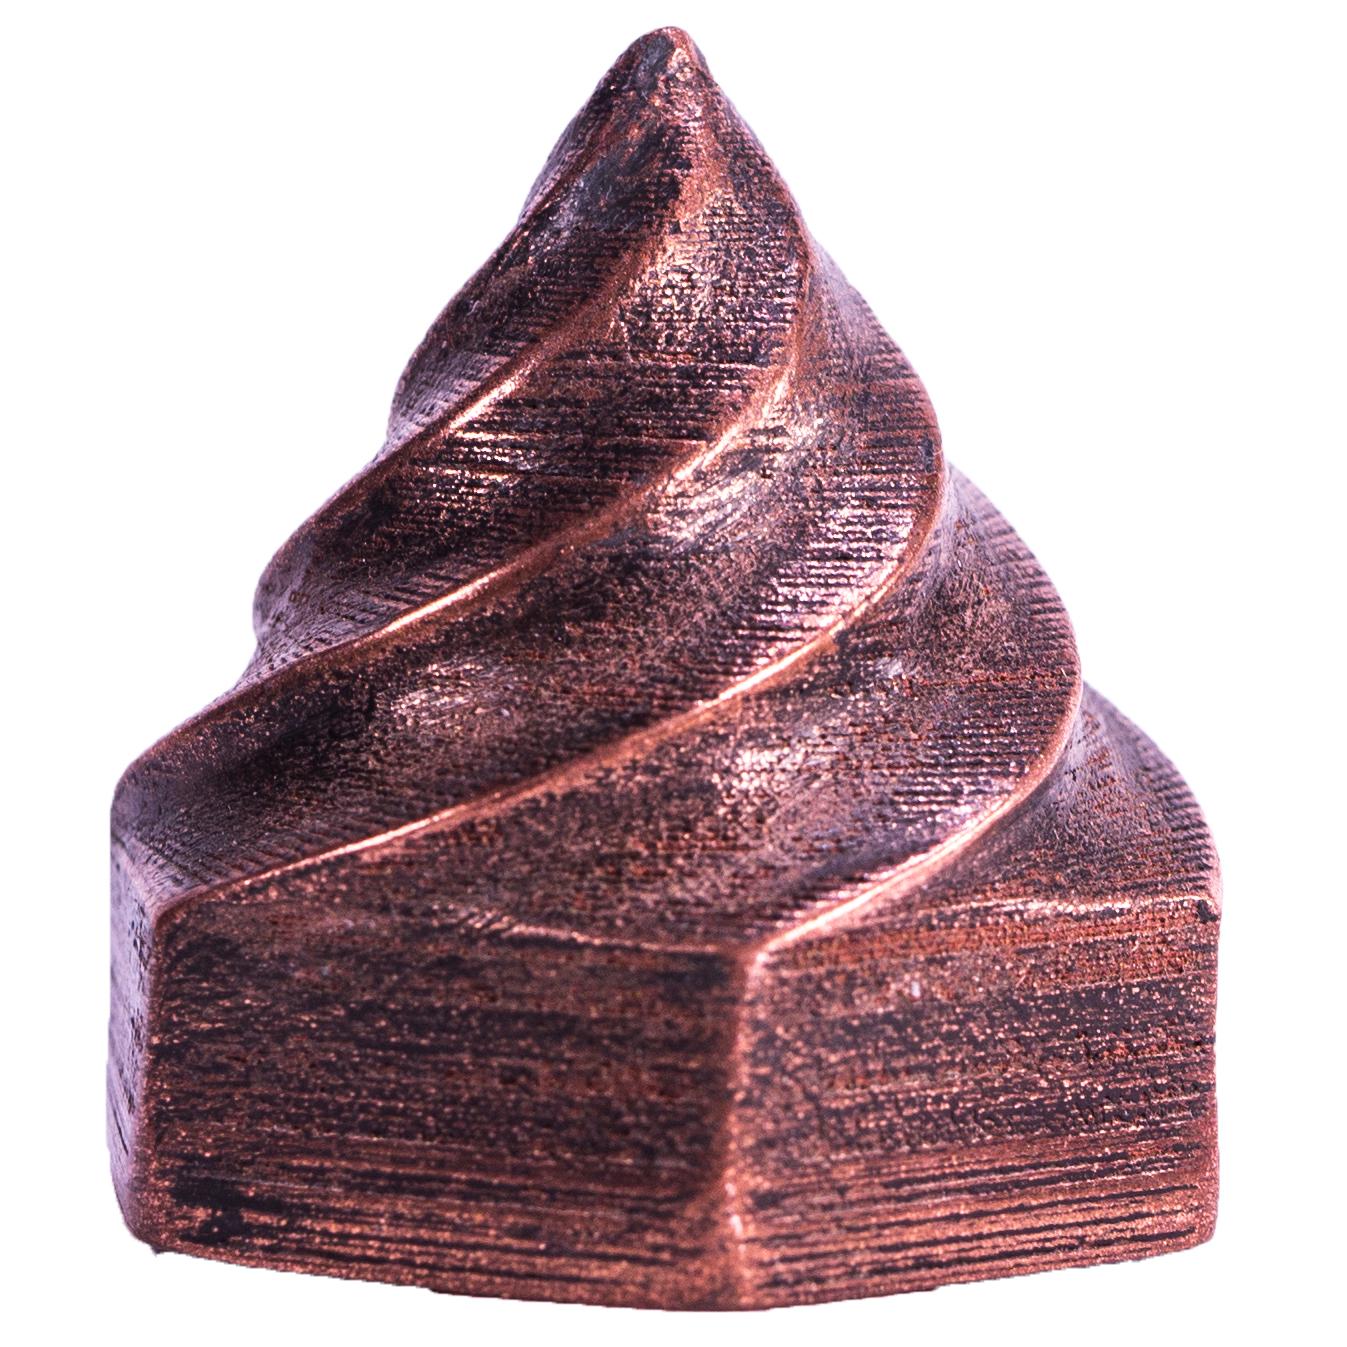 The Virtual Foundry Swirly Cone 3d model